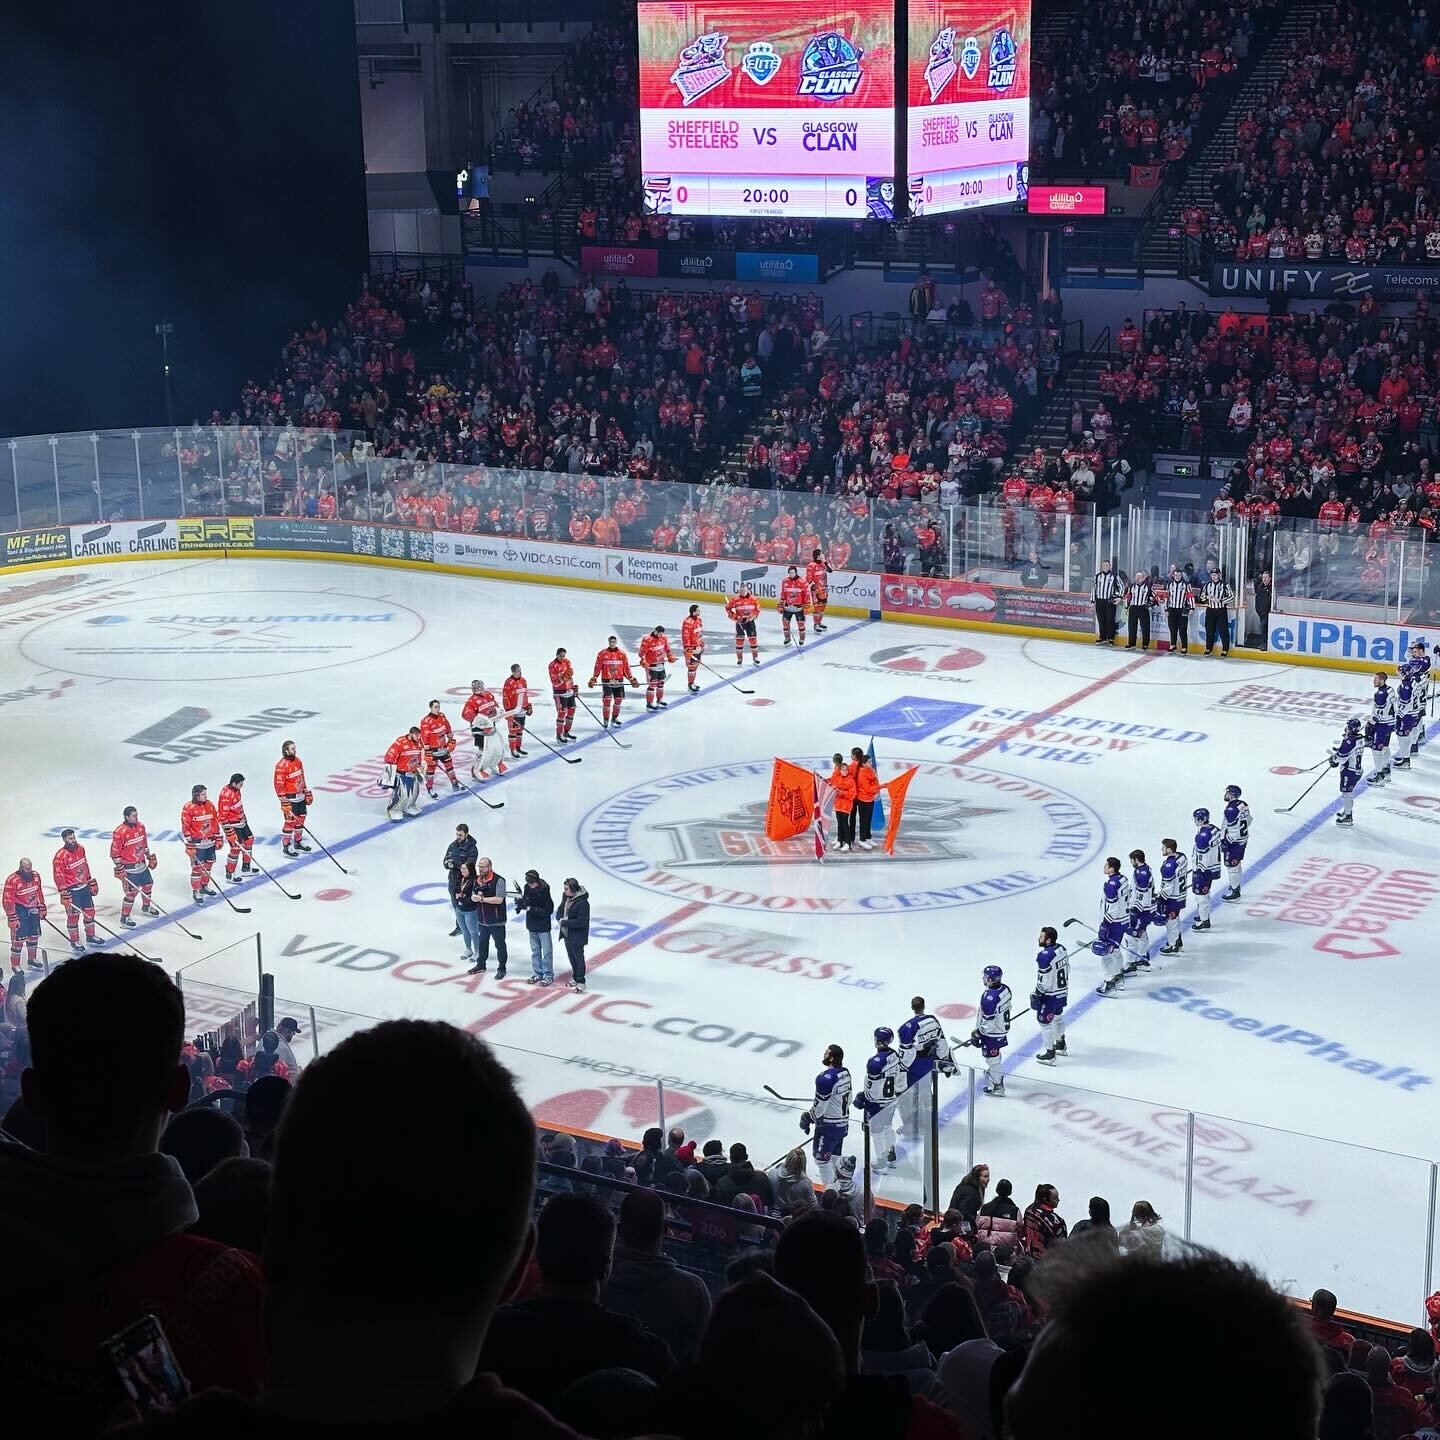 Sheffield Steelers 3 - 2 Glasgow Clan. We started strong with three goals in about thirteen minutes, then&hellip; nothing, until a fraction of a second after the final buzzer. Still, a W is a W!

#SheffieldSteelers #EIHL #Yorkshire